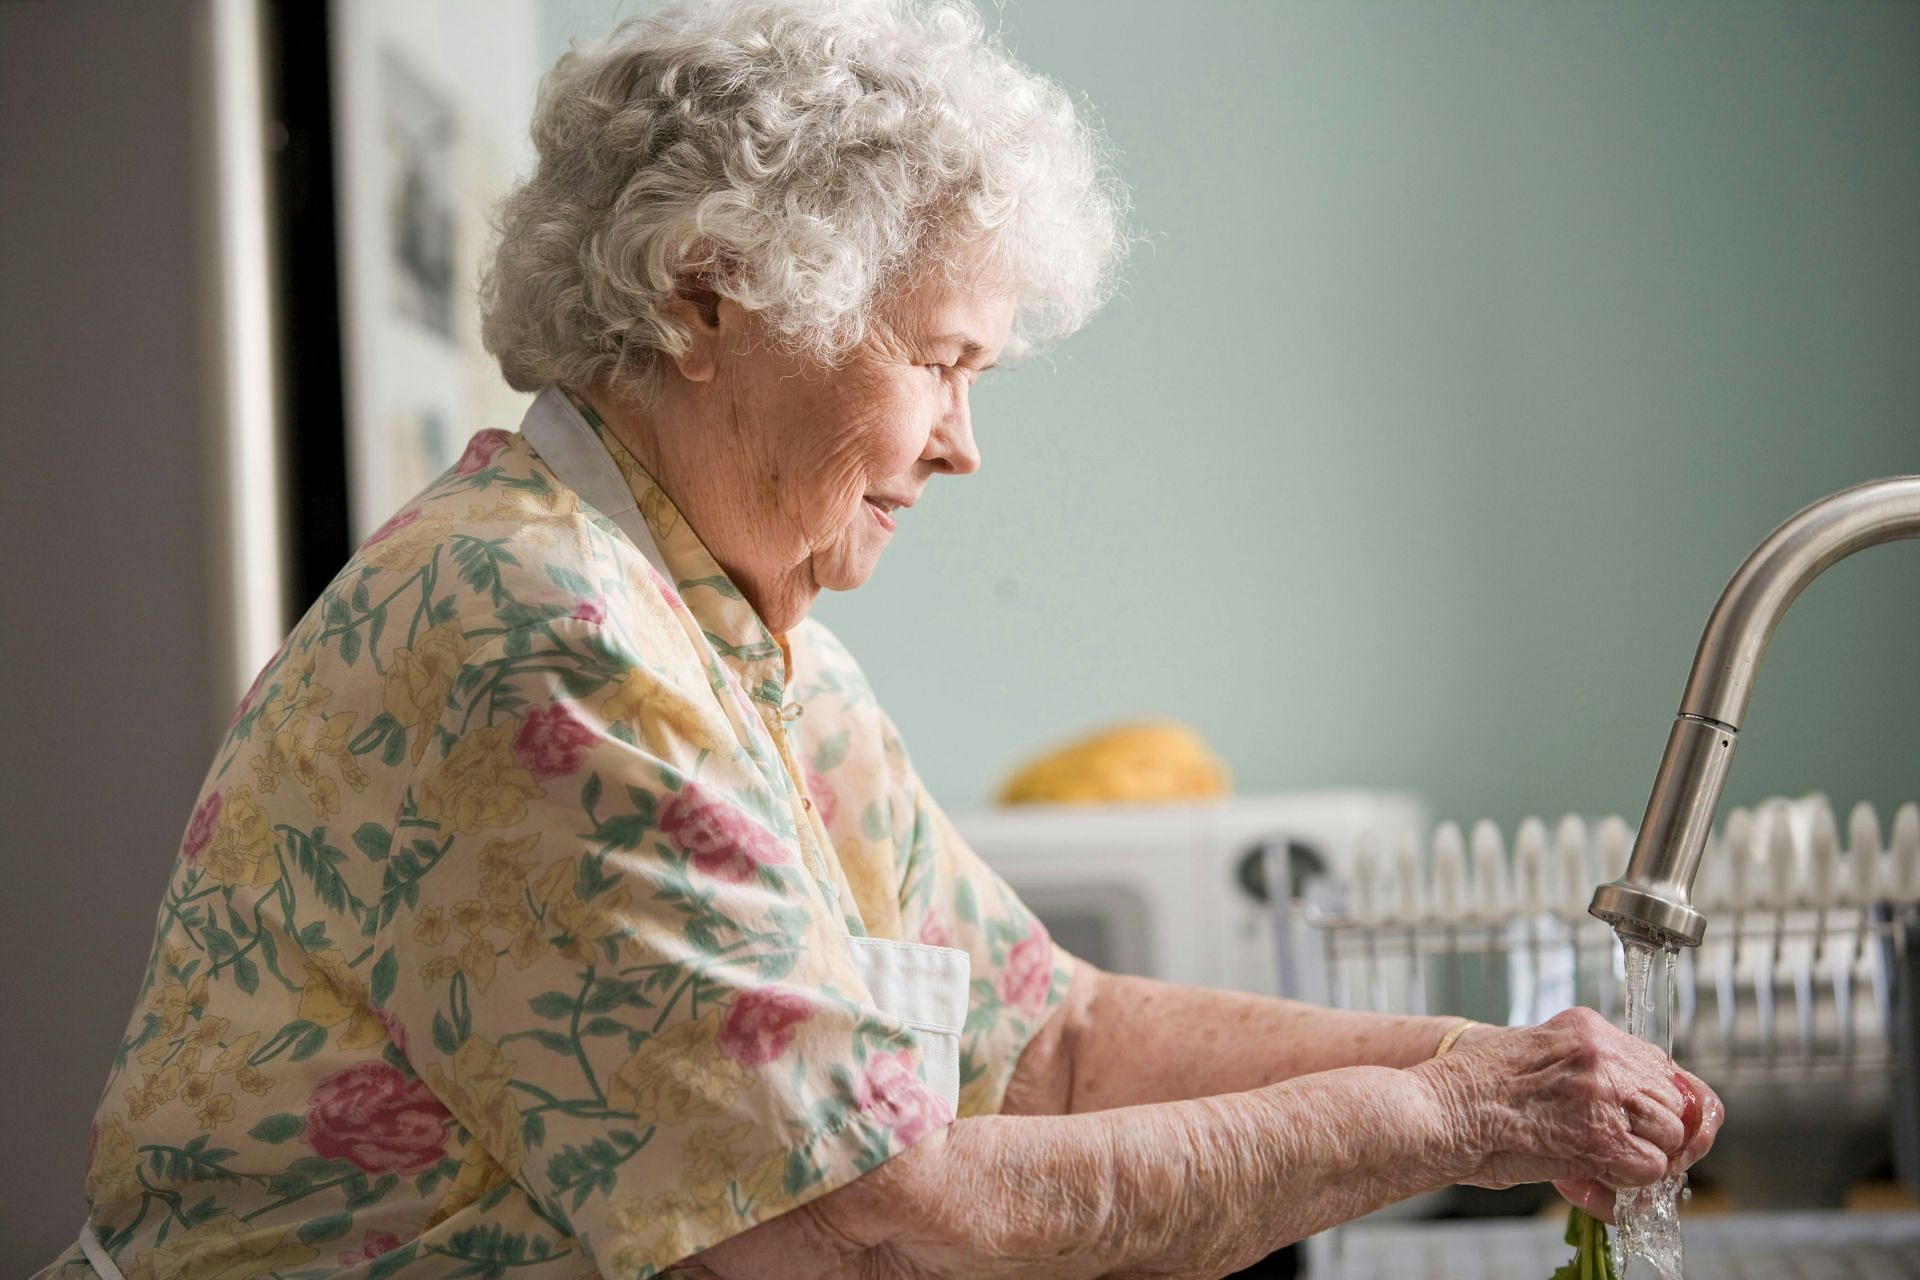 Senior adults are the most affected by this disease (Image via Unsplash/CDC)